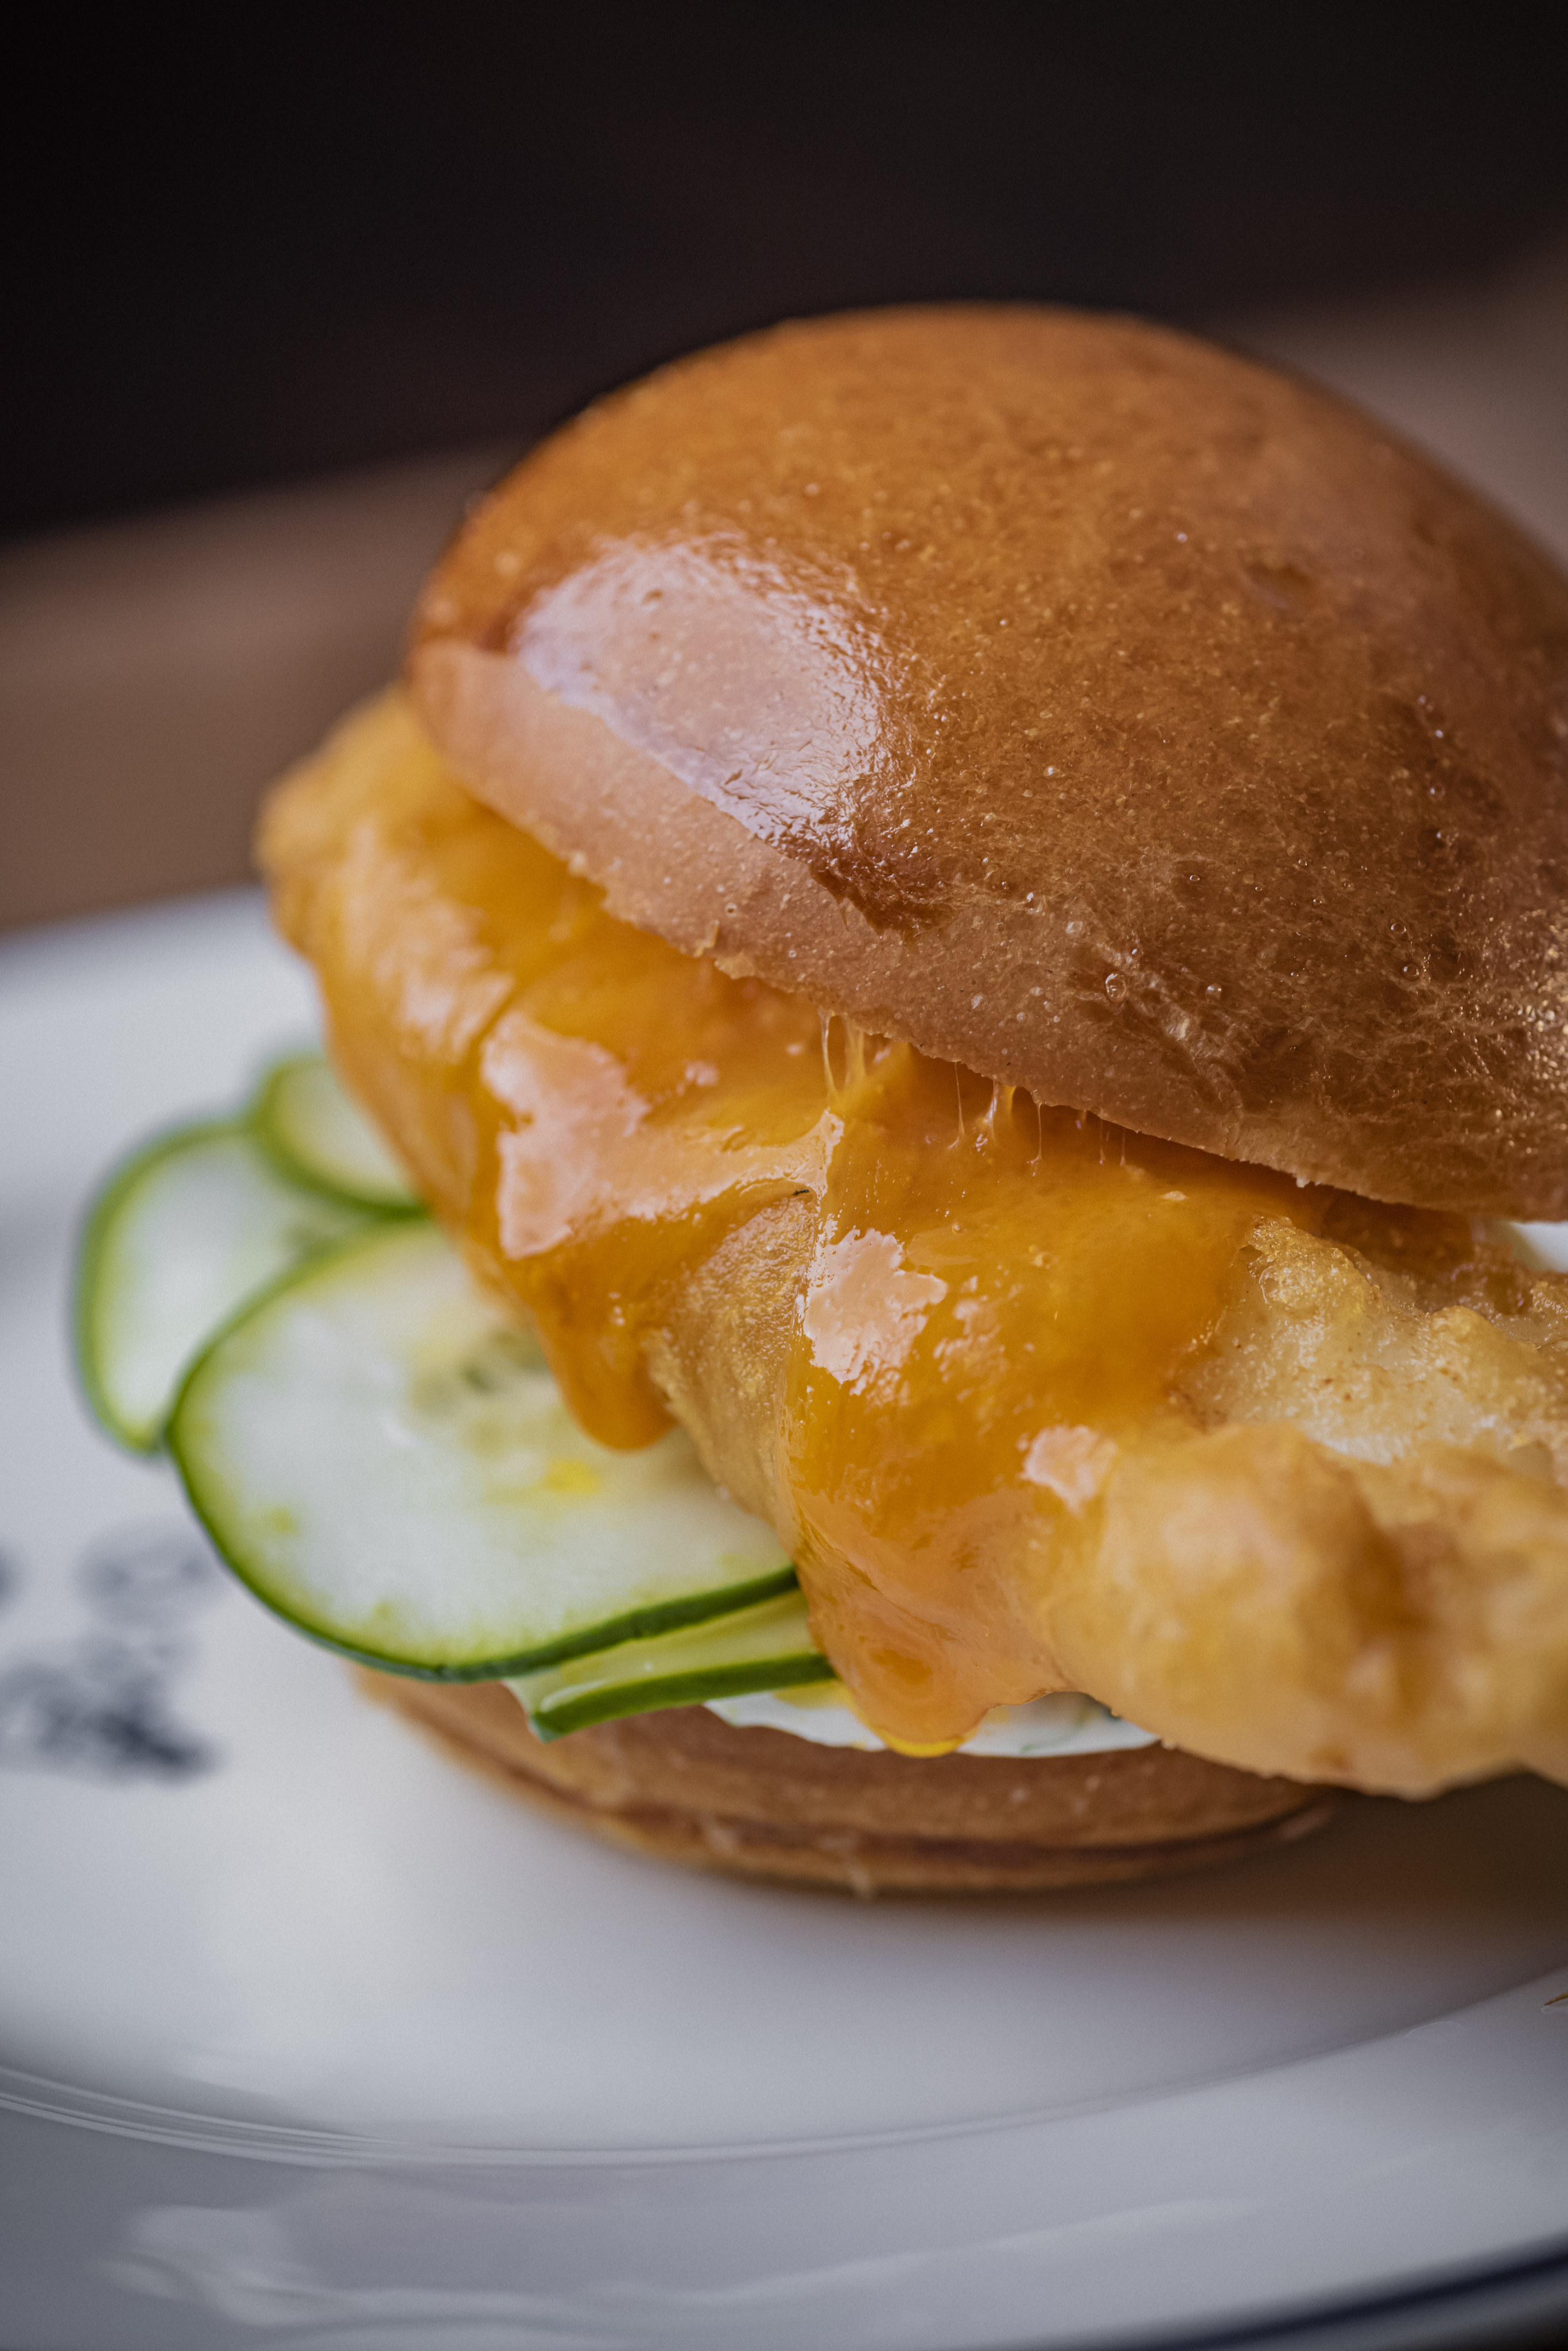 The fish burger at The Baker & The Bottleman in Wan Chai, Hong Kong: Photo: The Baker & The Bottleman